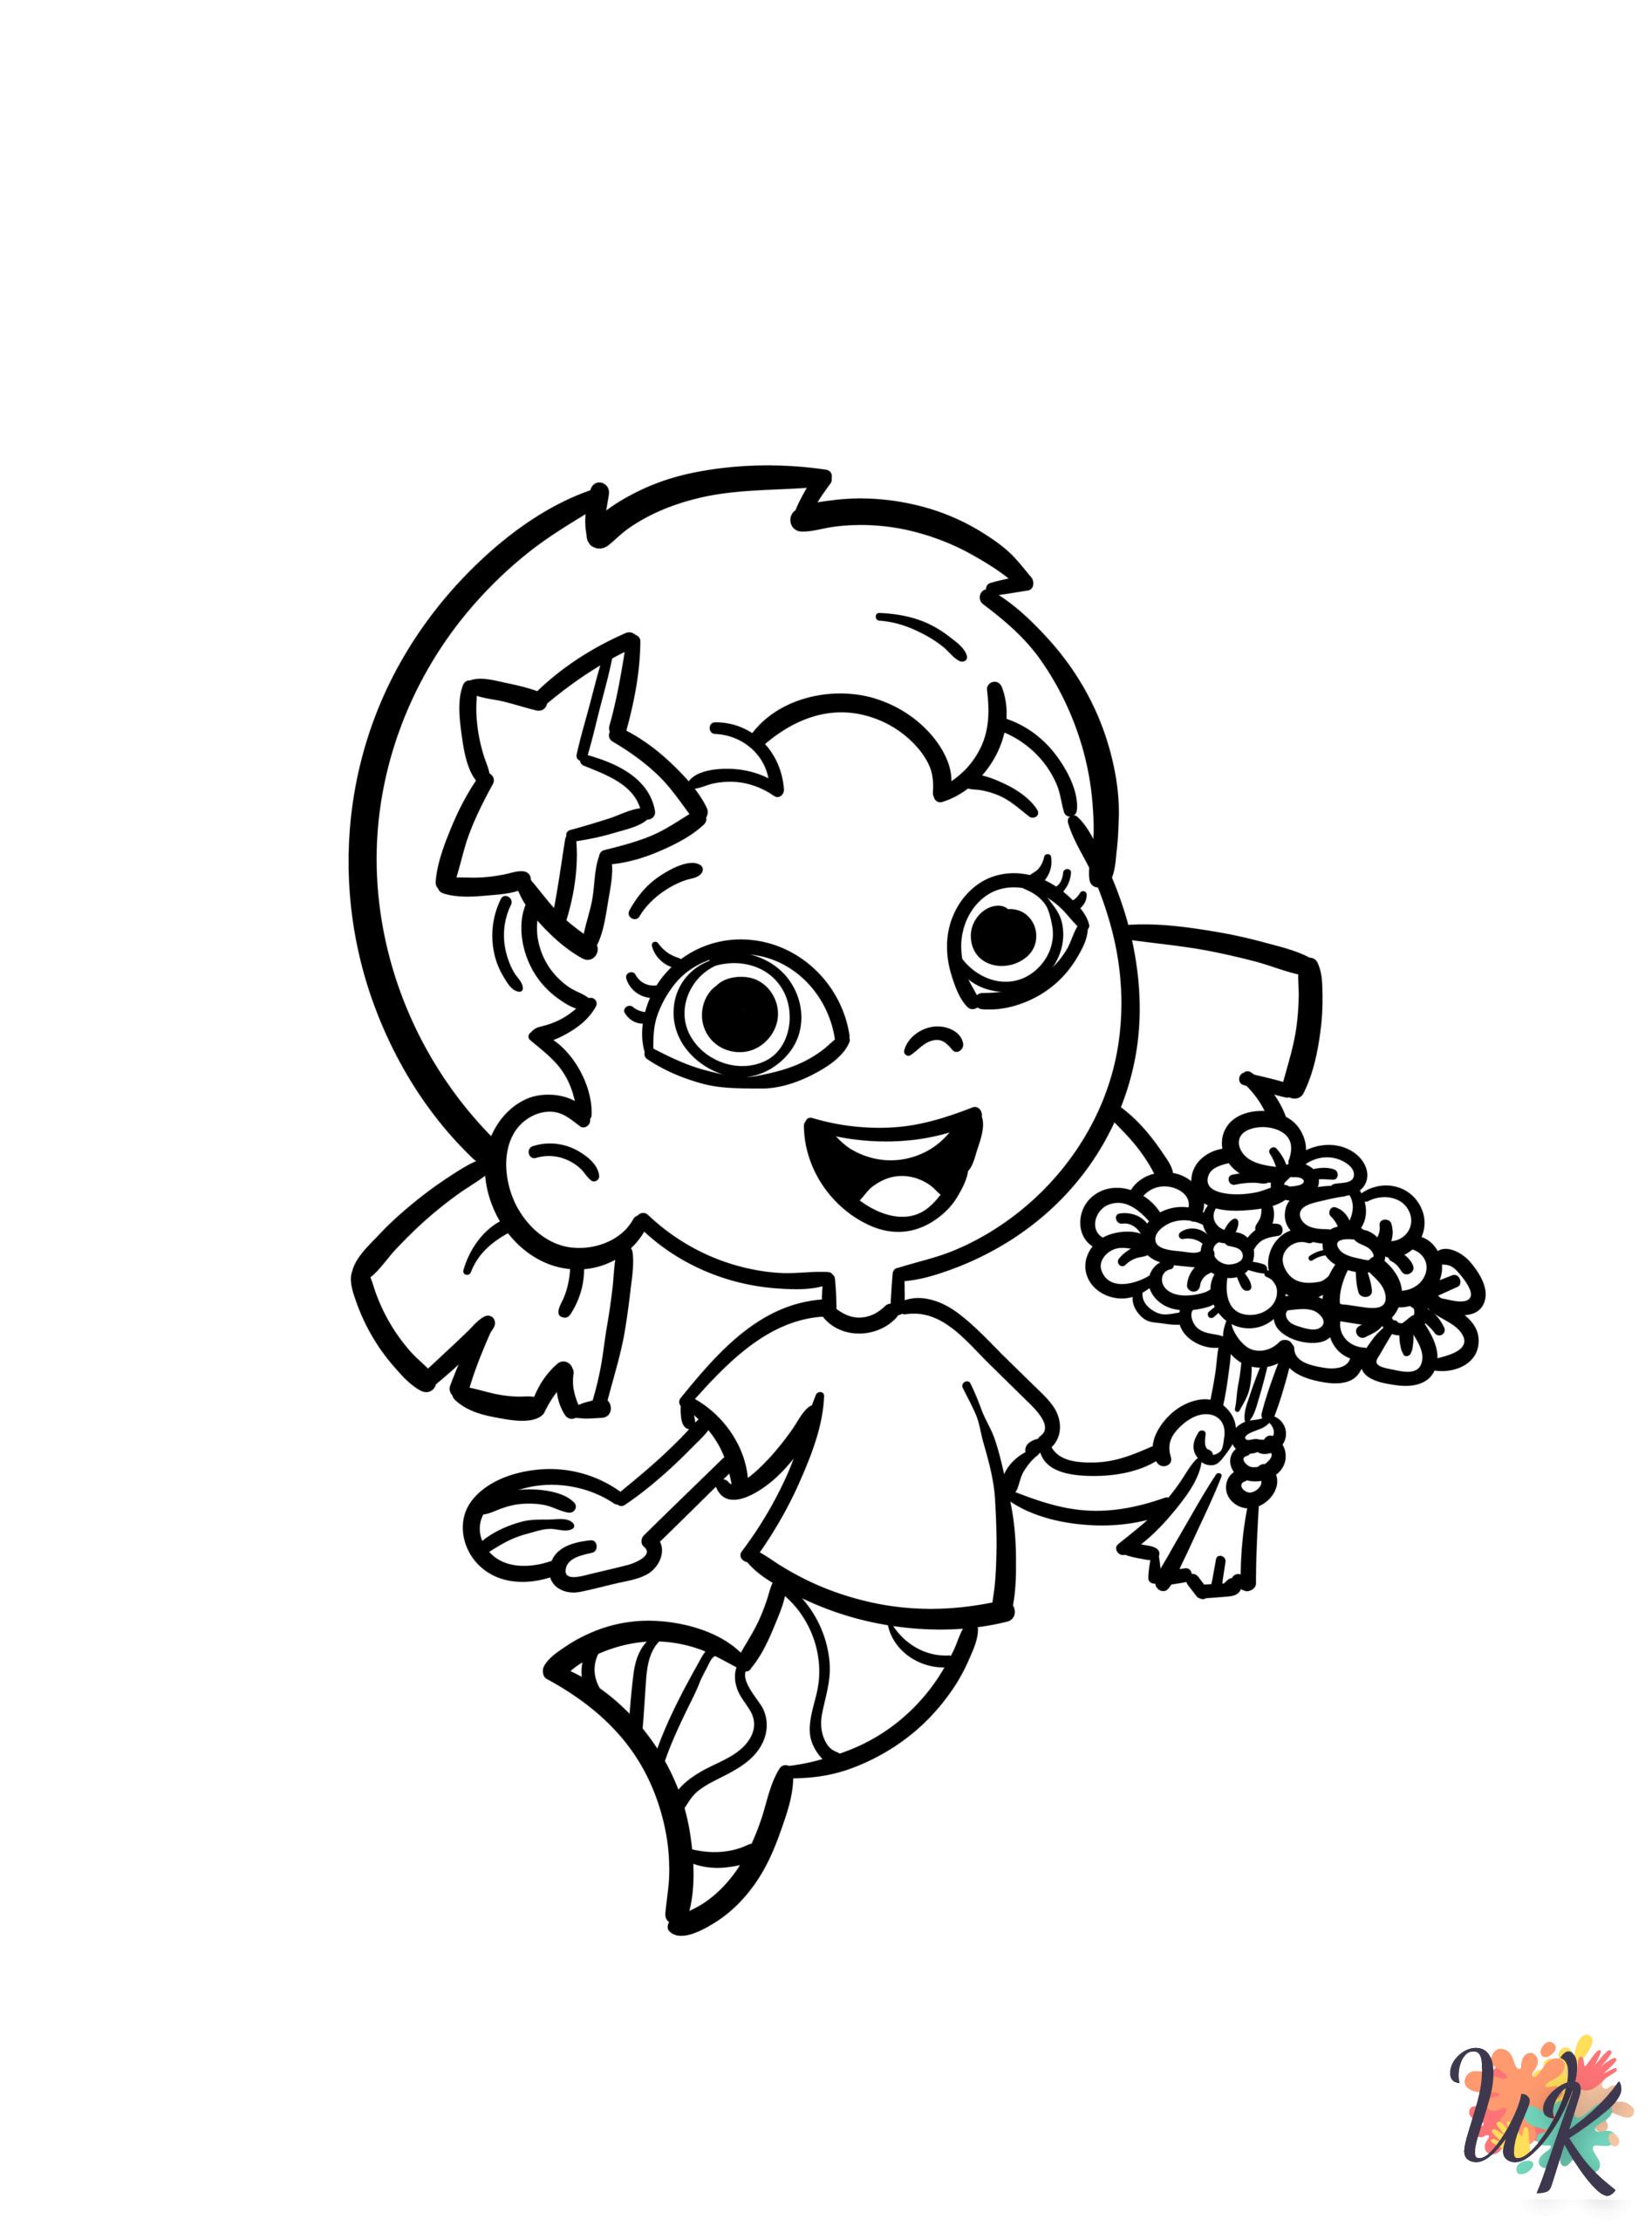 Bubble Guppies coloring pages for kids